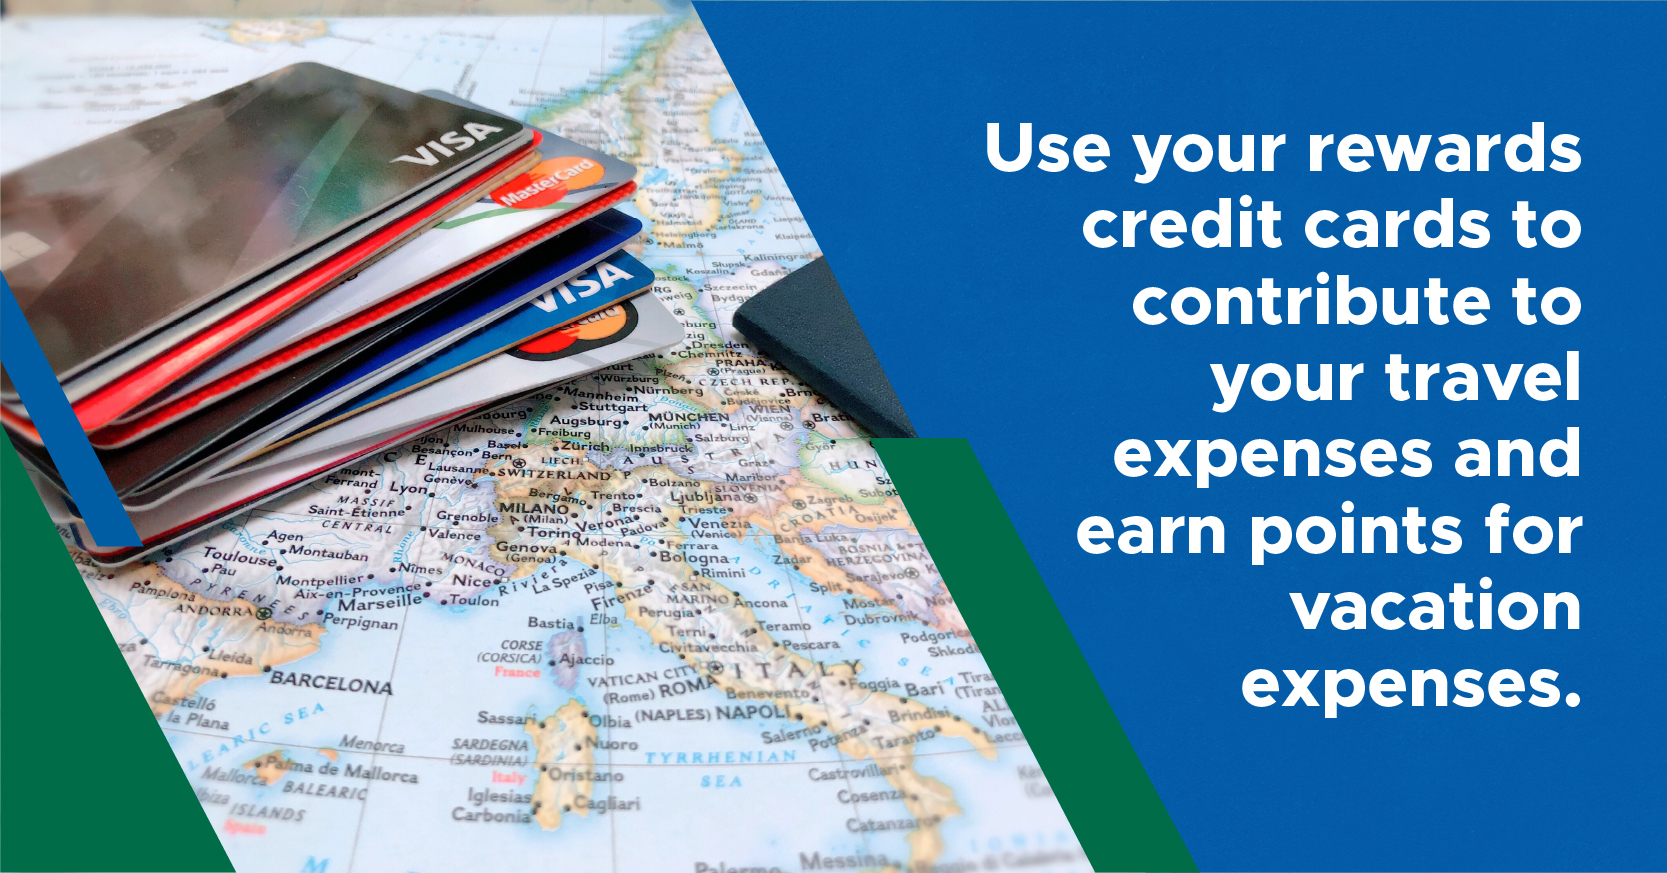 Use your rewards credit card to contribute to your travel expenses and earn points for vacation expenses - credit cards stacked on top of a map